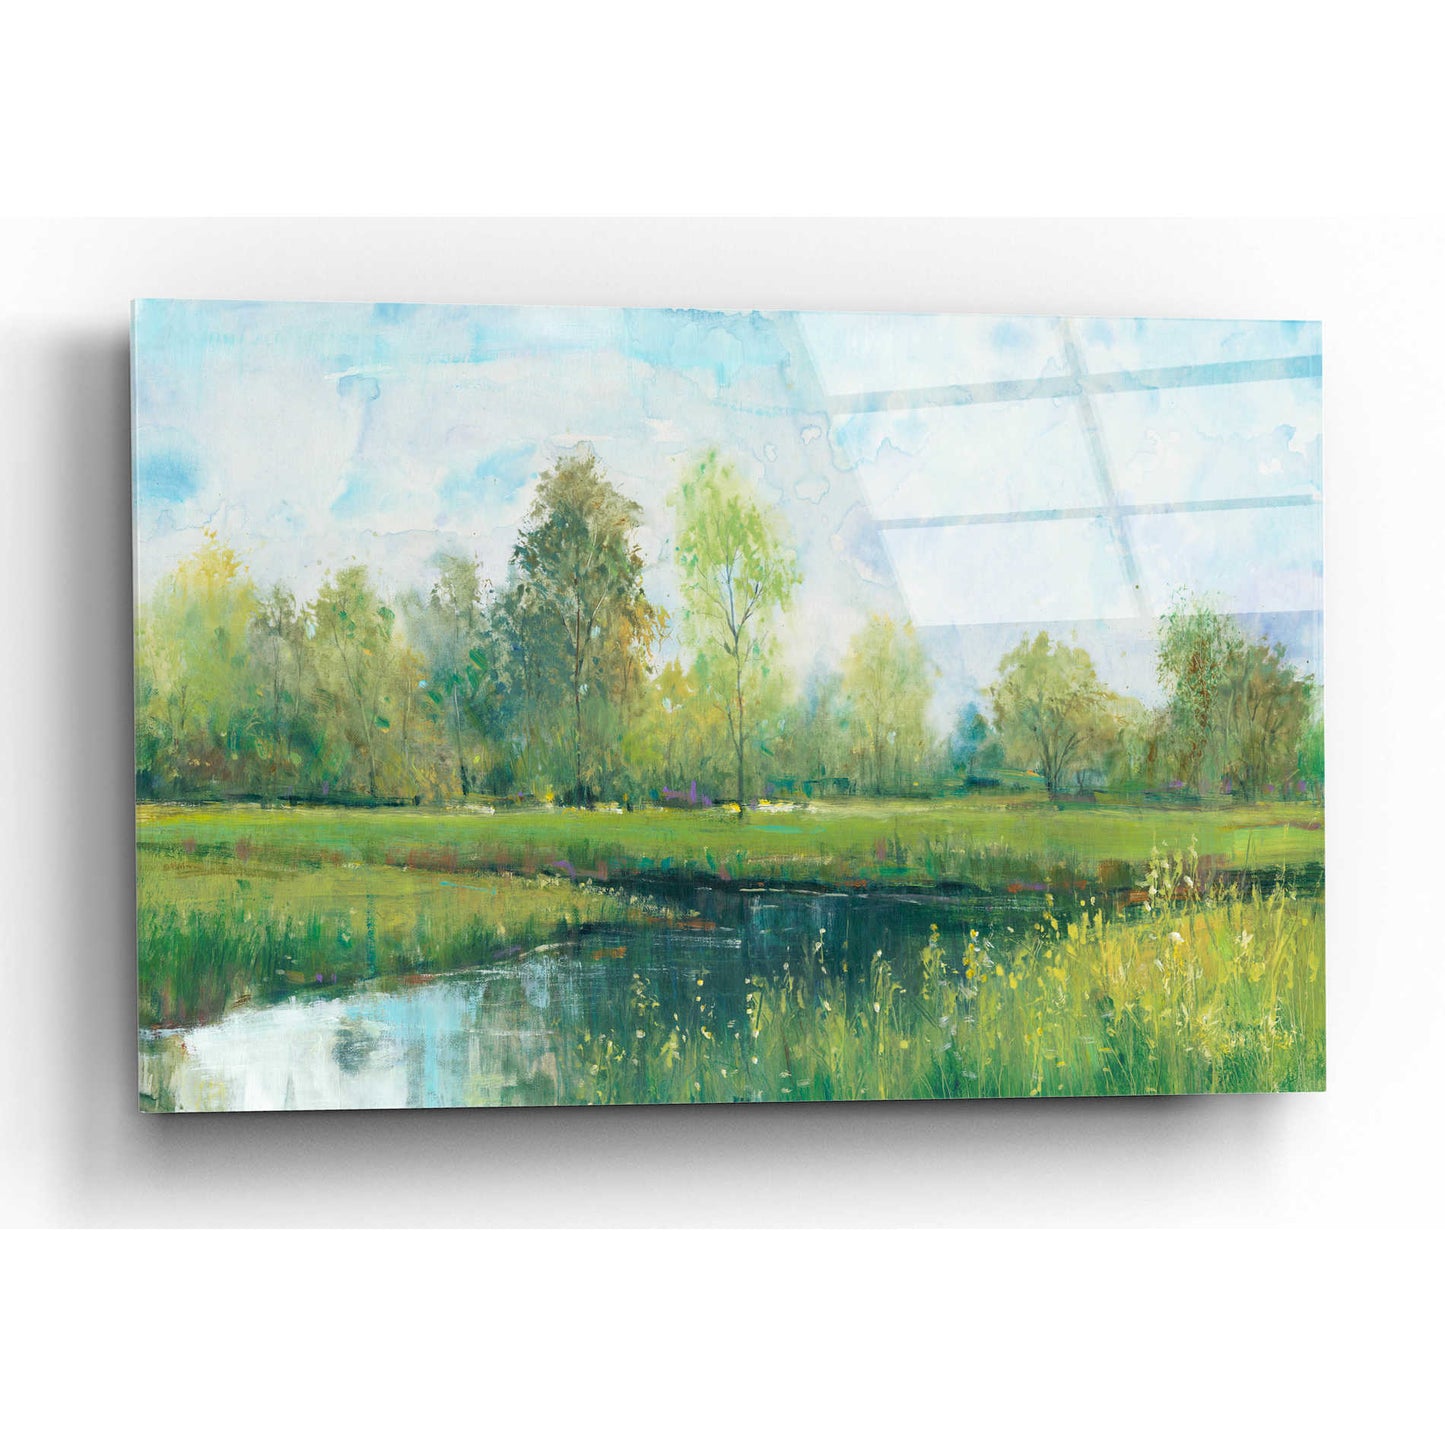 Epic Art 'Tranquil Park I' by Tim O'Toole, Acrylic Glass Wall Art